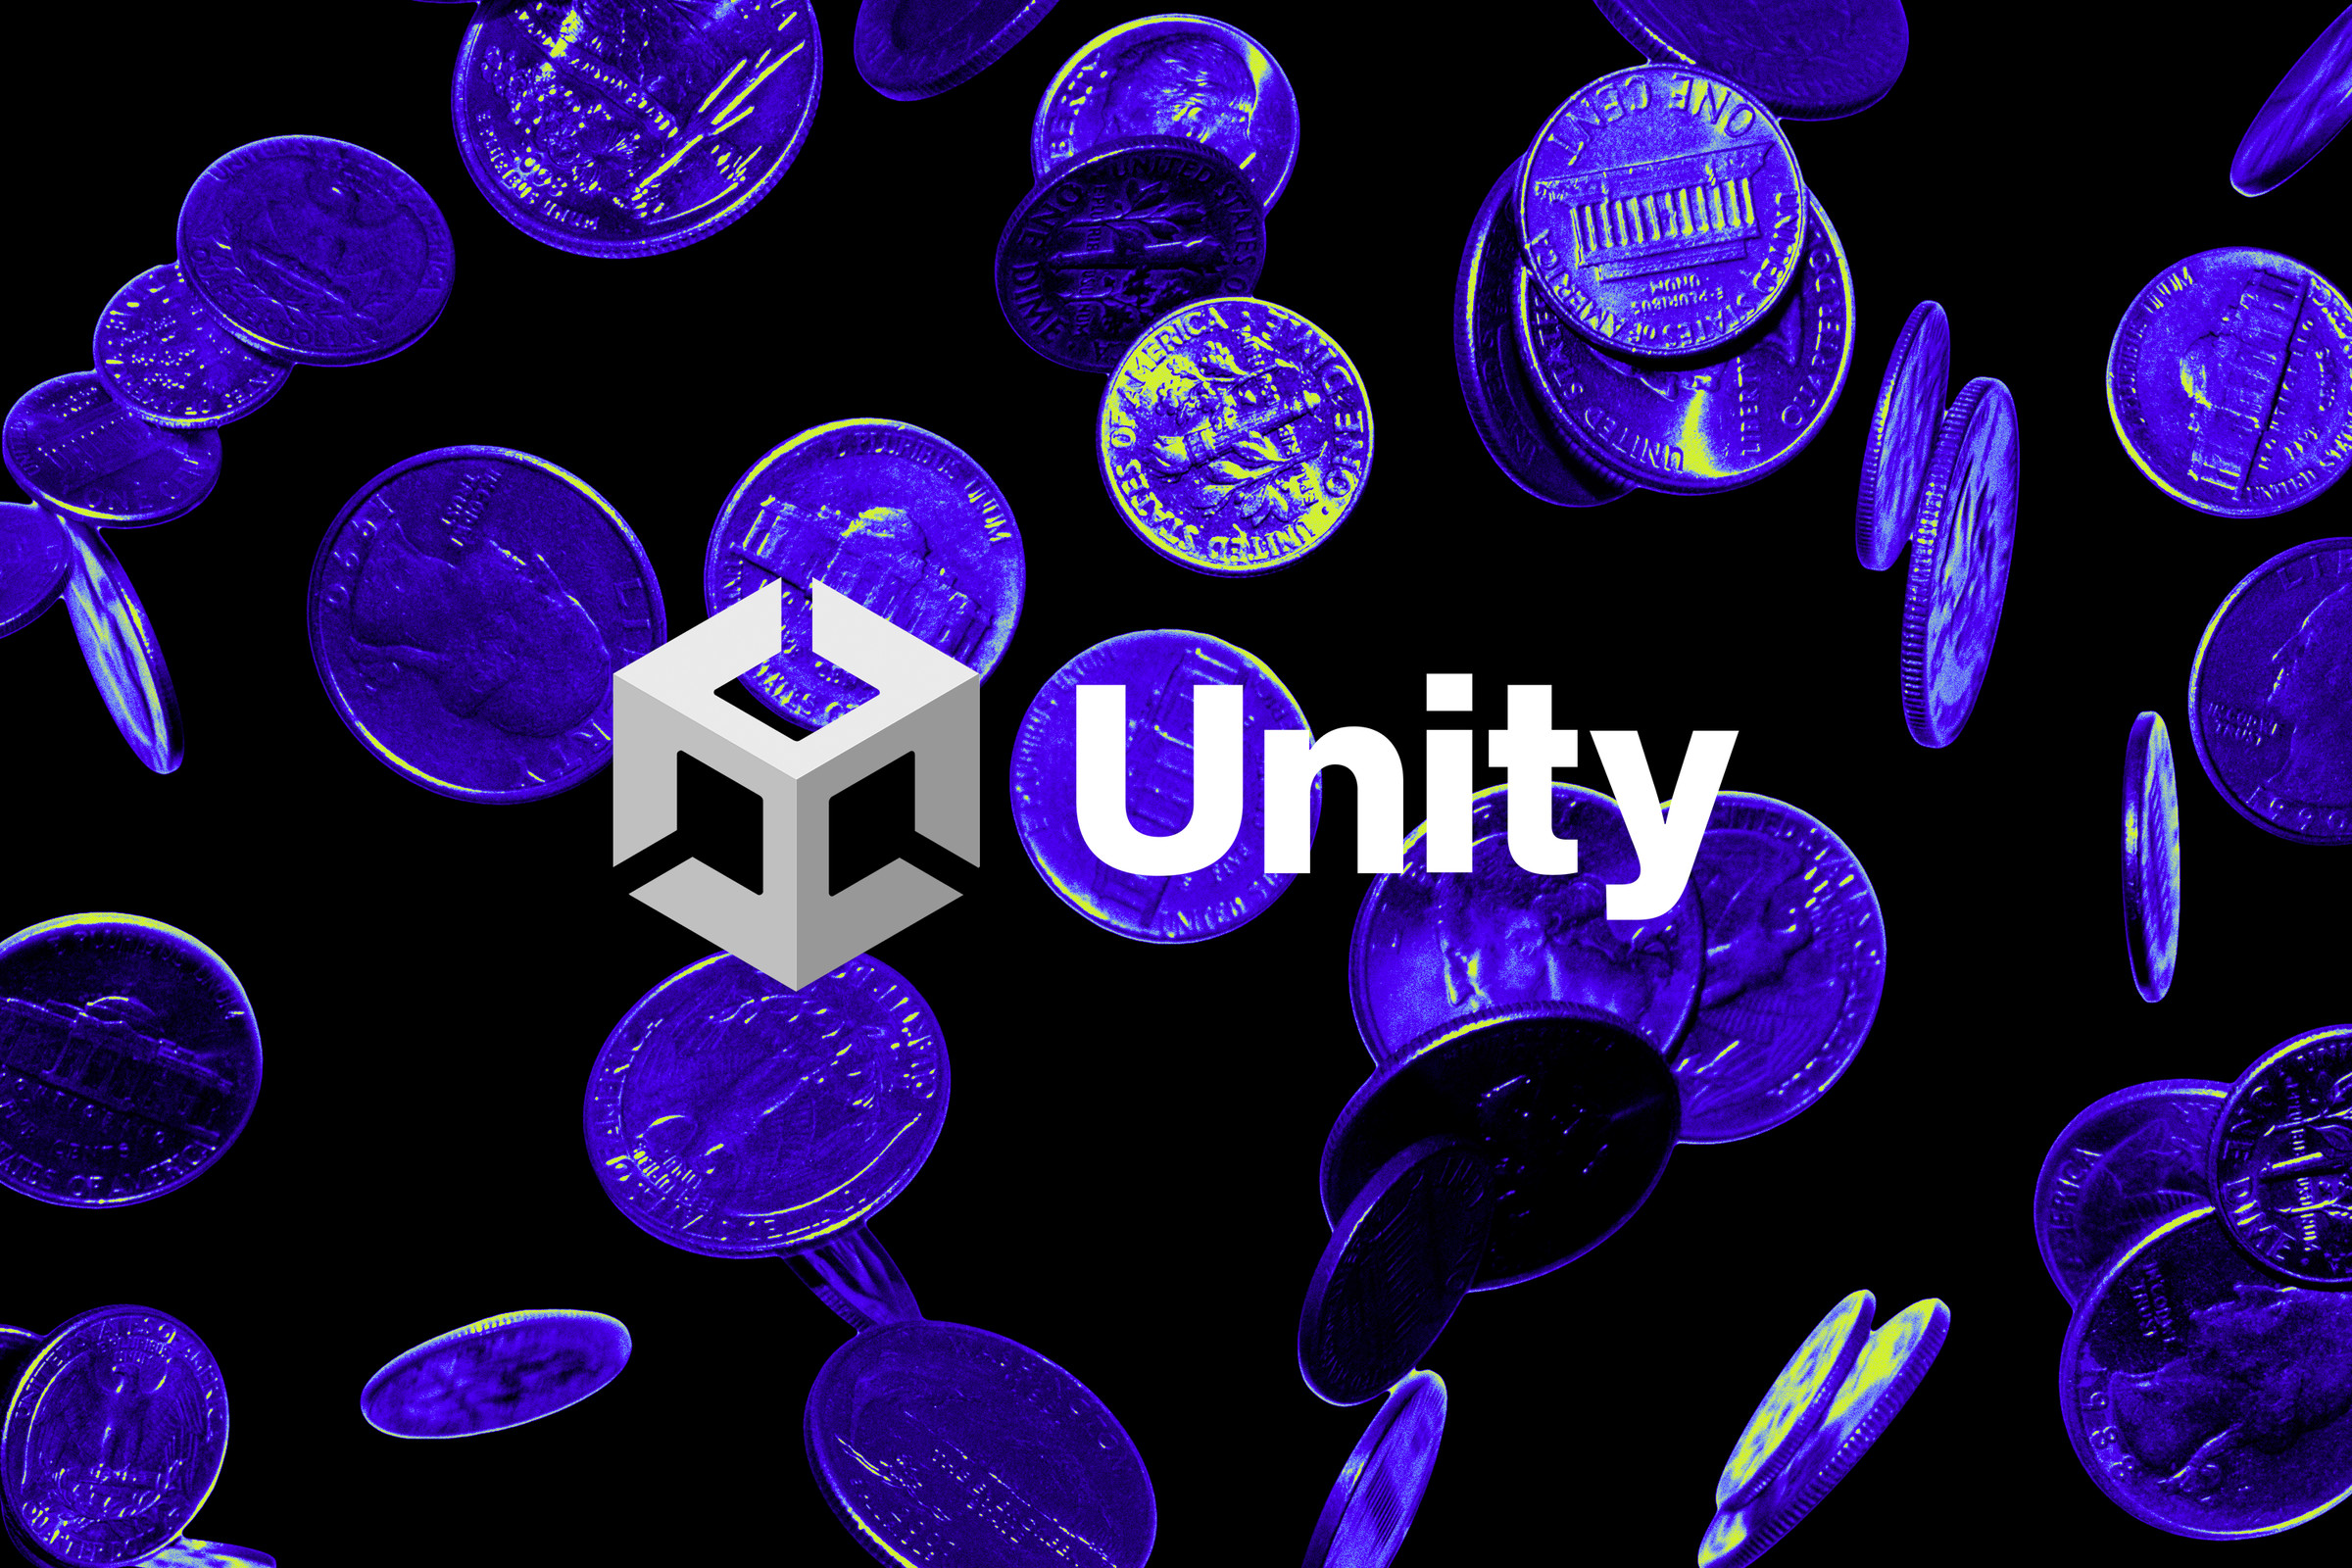 Photo illustration of the Unity logo with coins falling in the background.